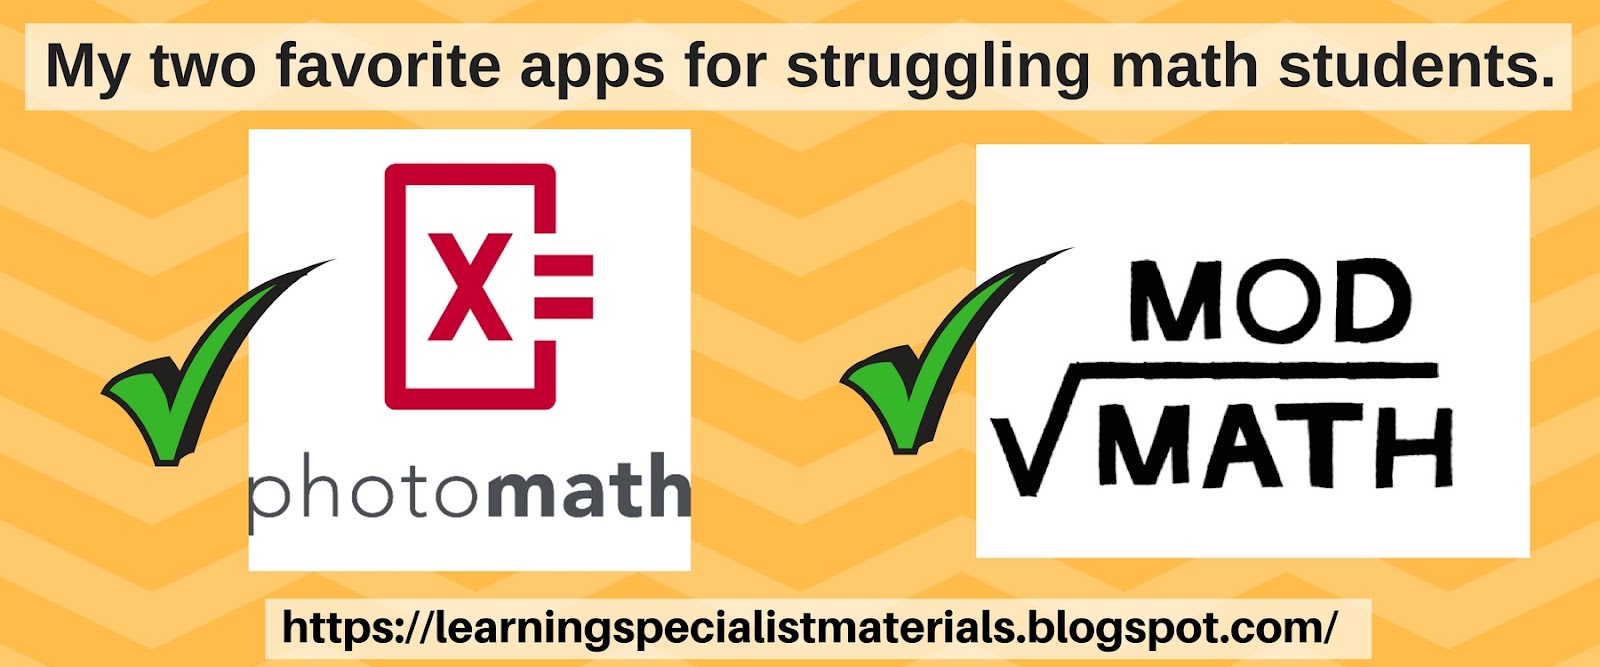 PhotoMath and ModMath: Best FREE Apps for Struggling Math Students